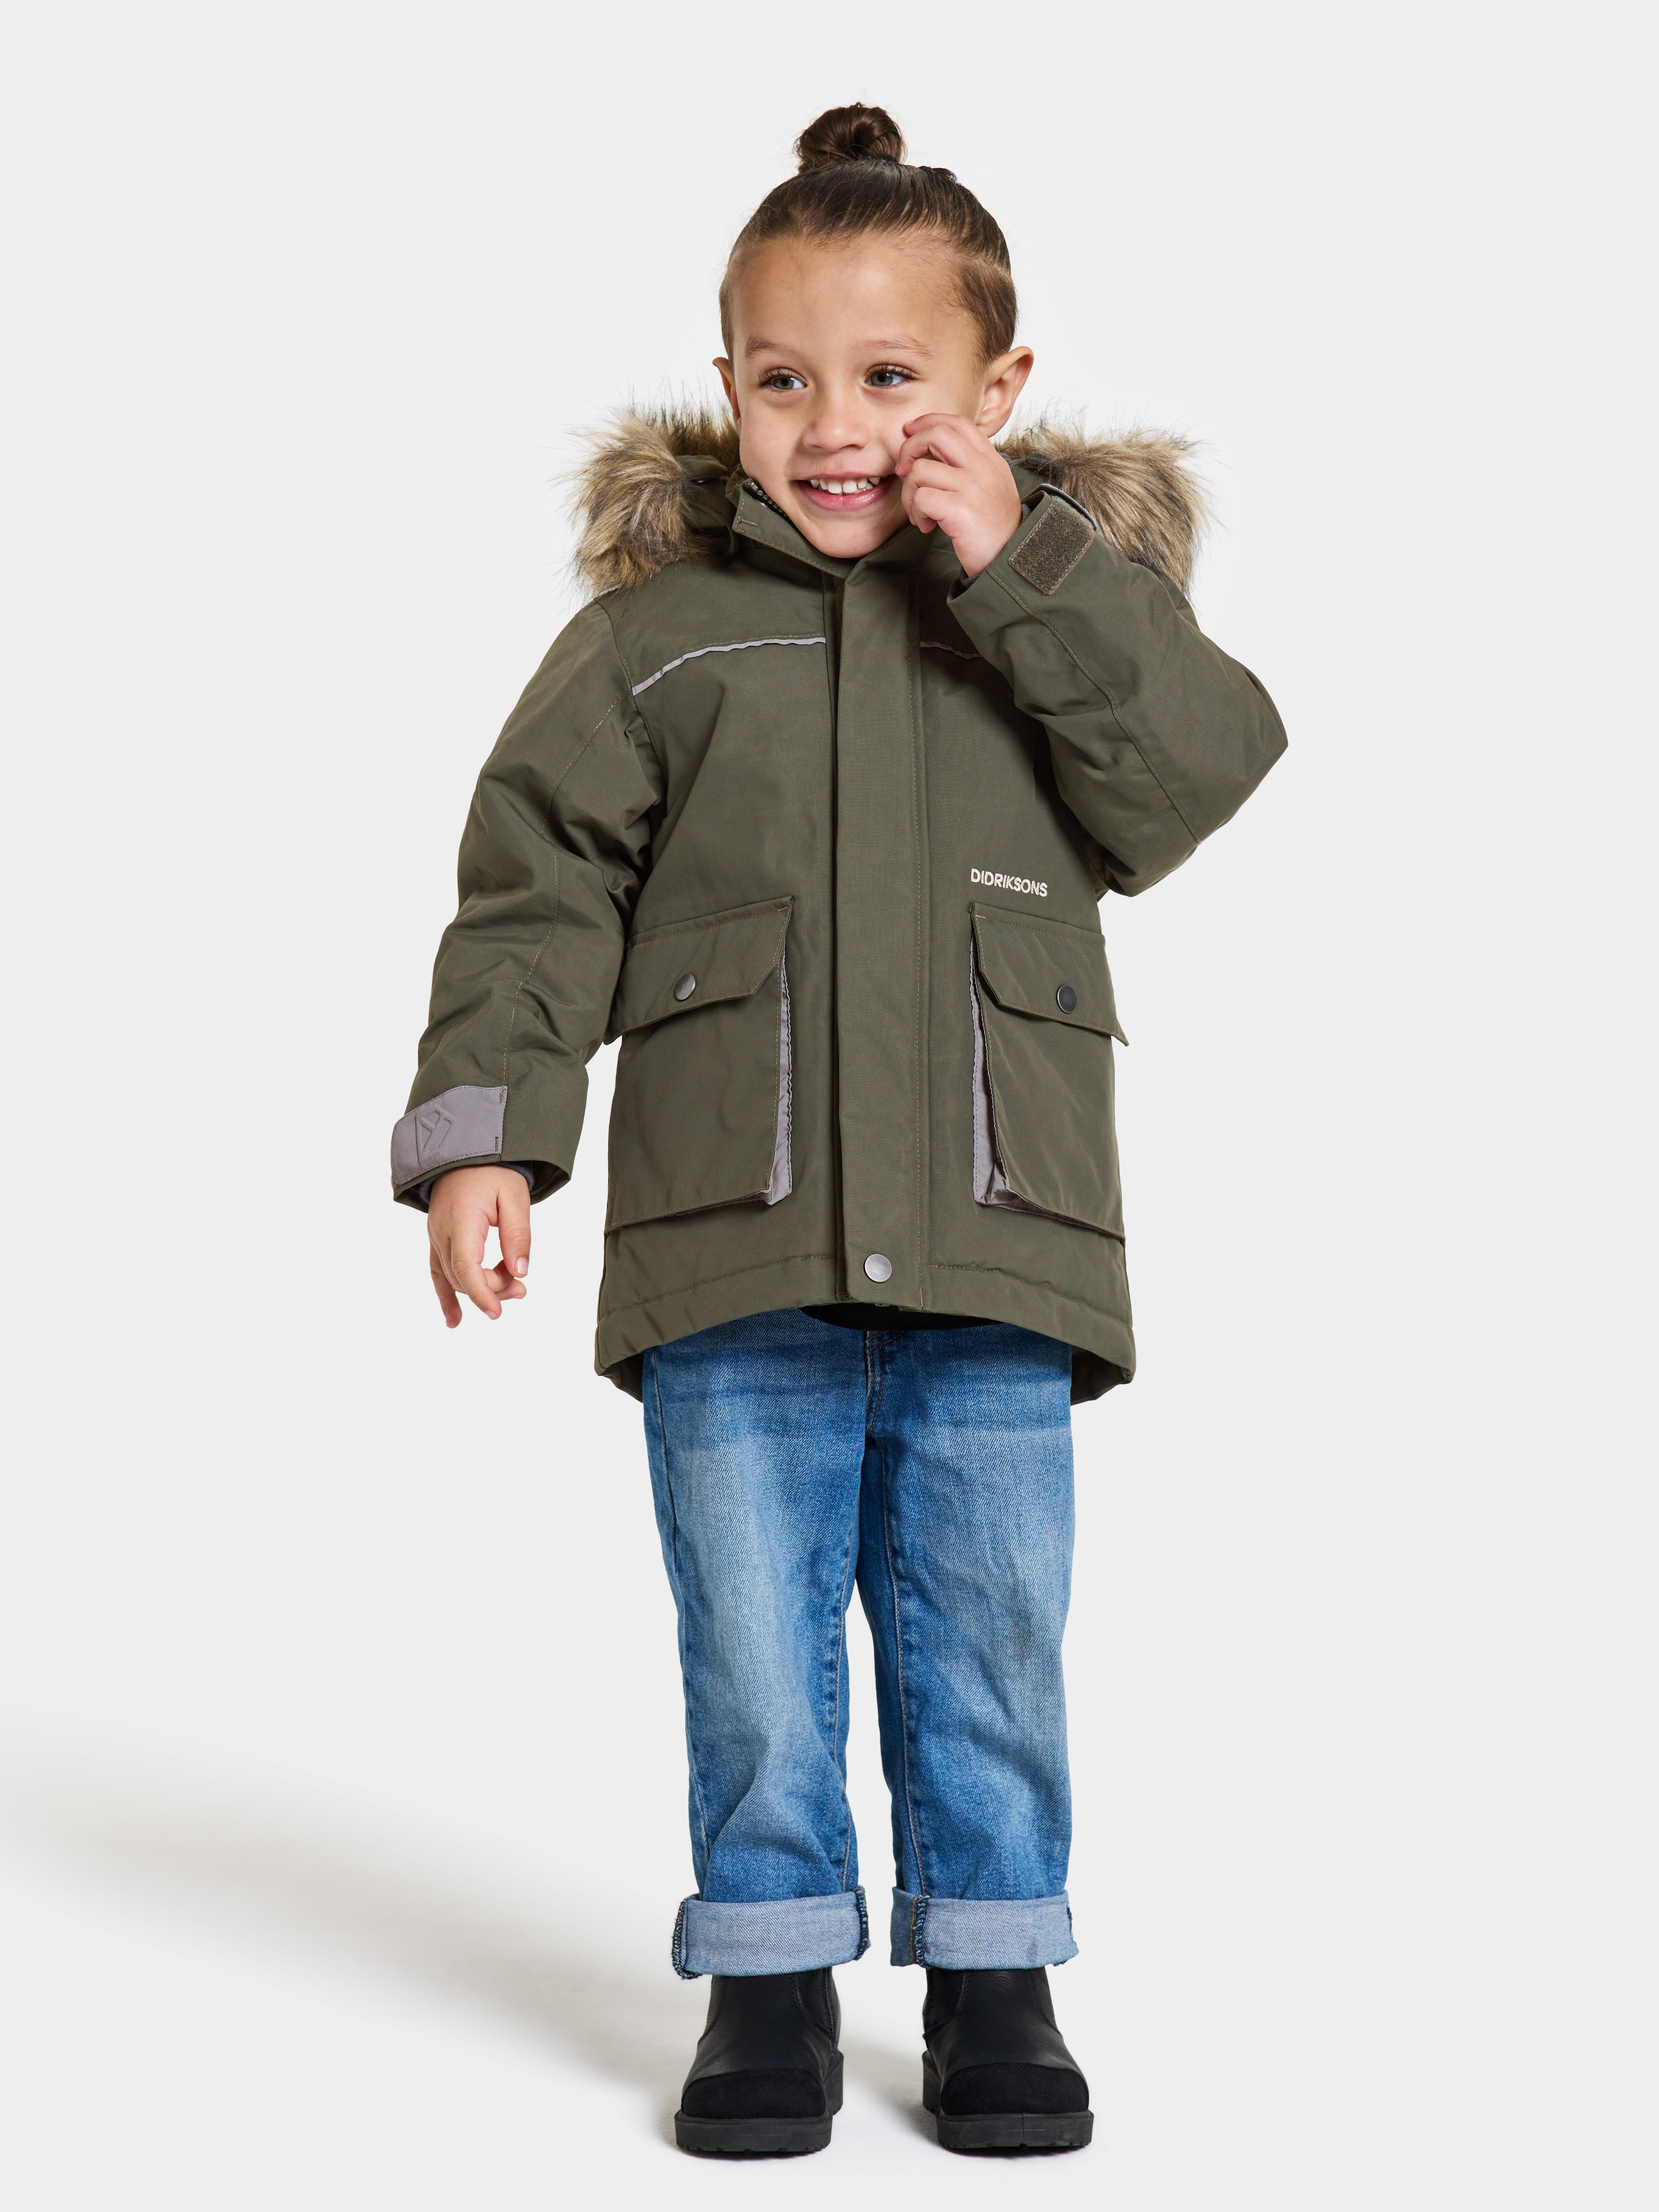 Kids\' Kure Parka 6 Black | Buy Kids\' Kure Parka 6 Black here | Outnorth